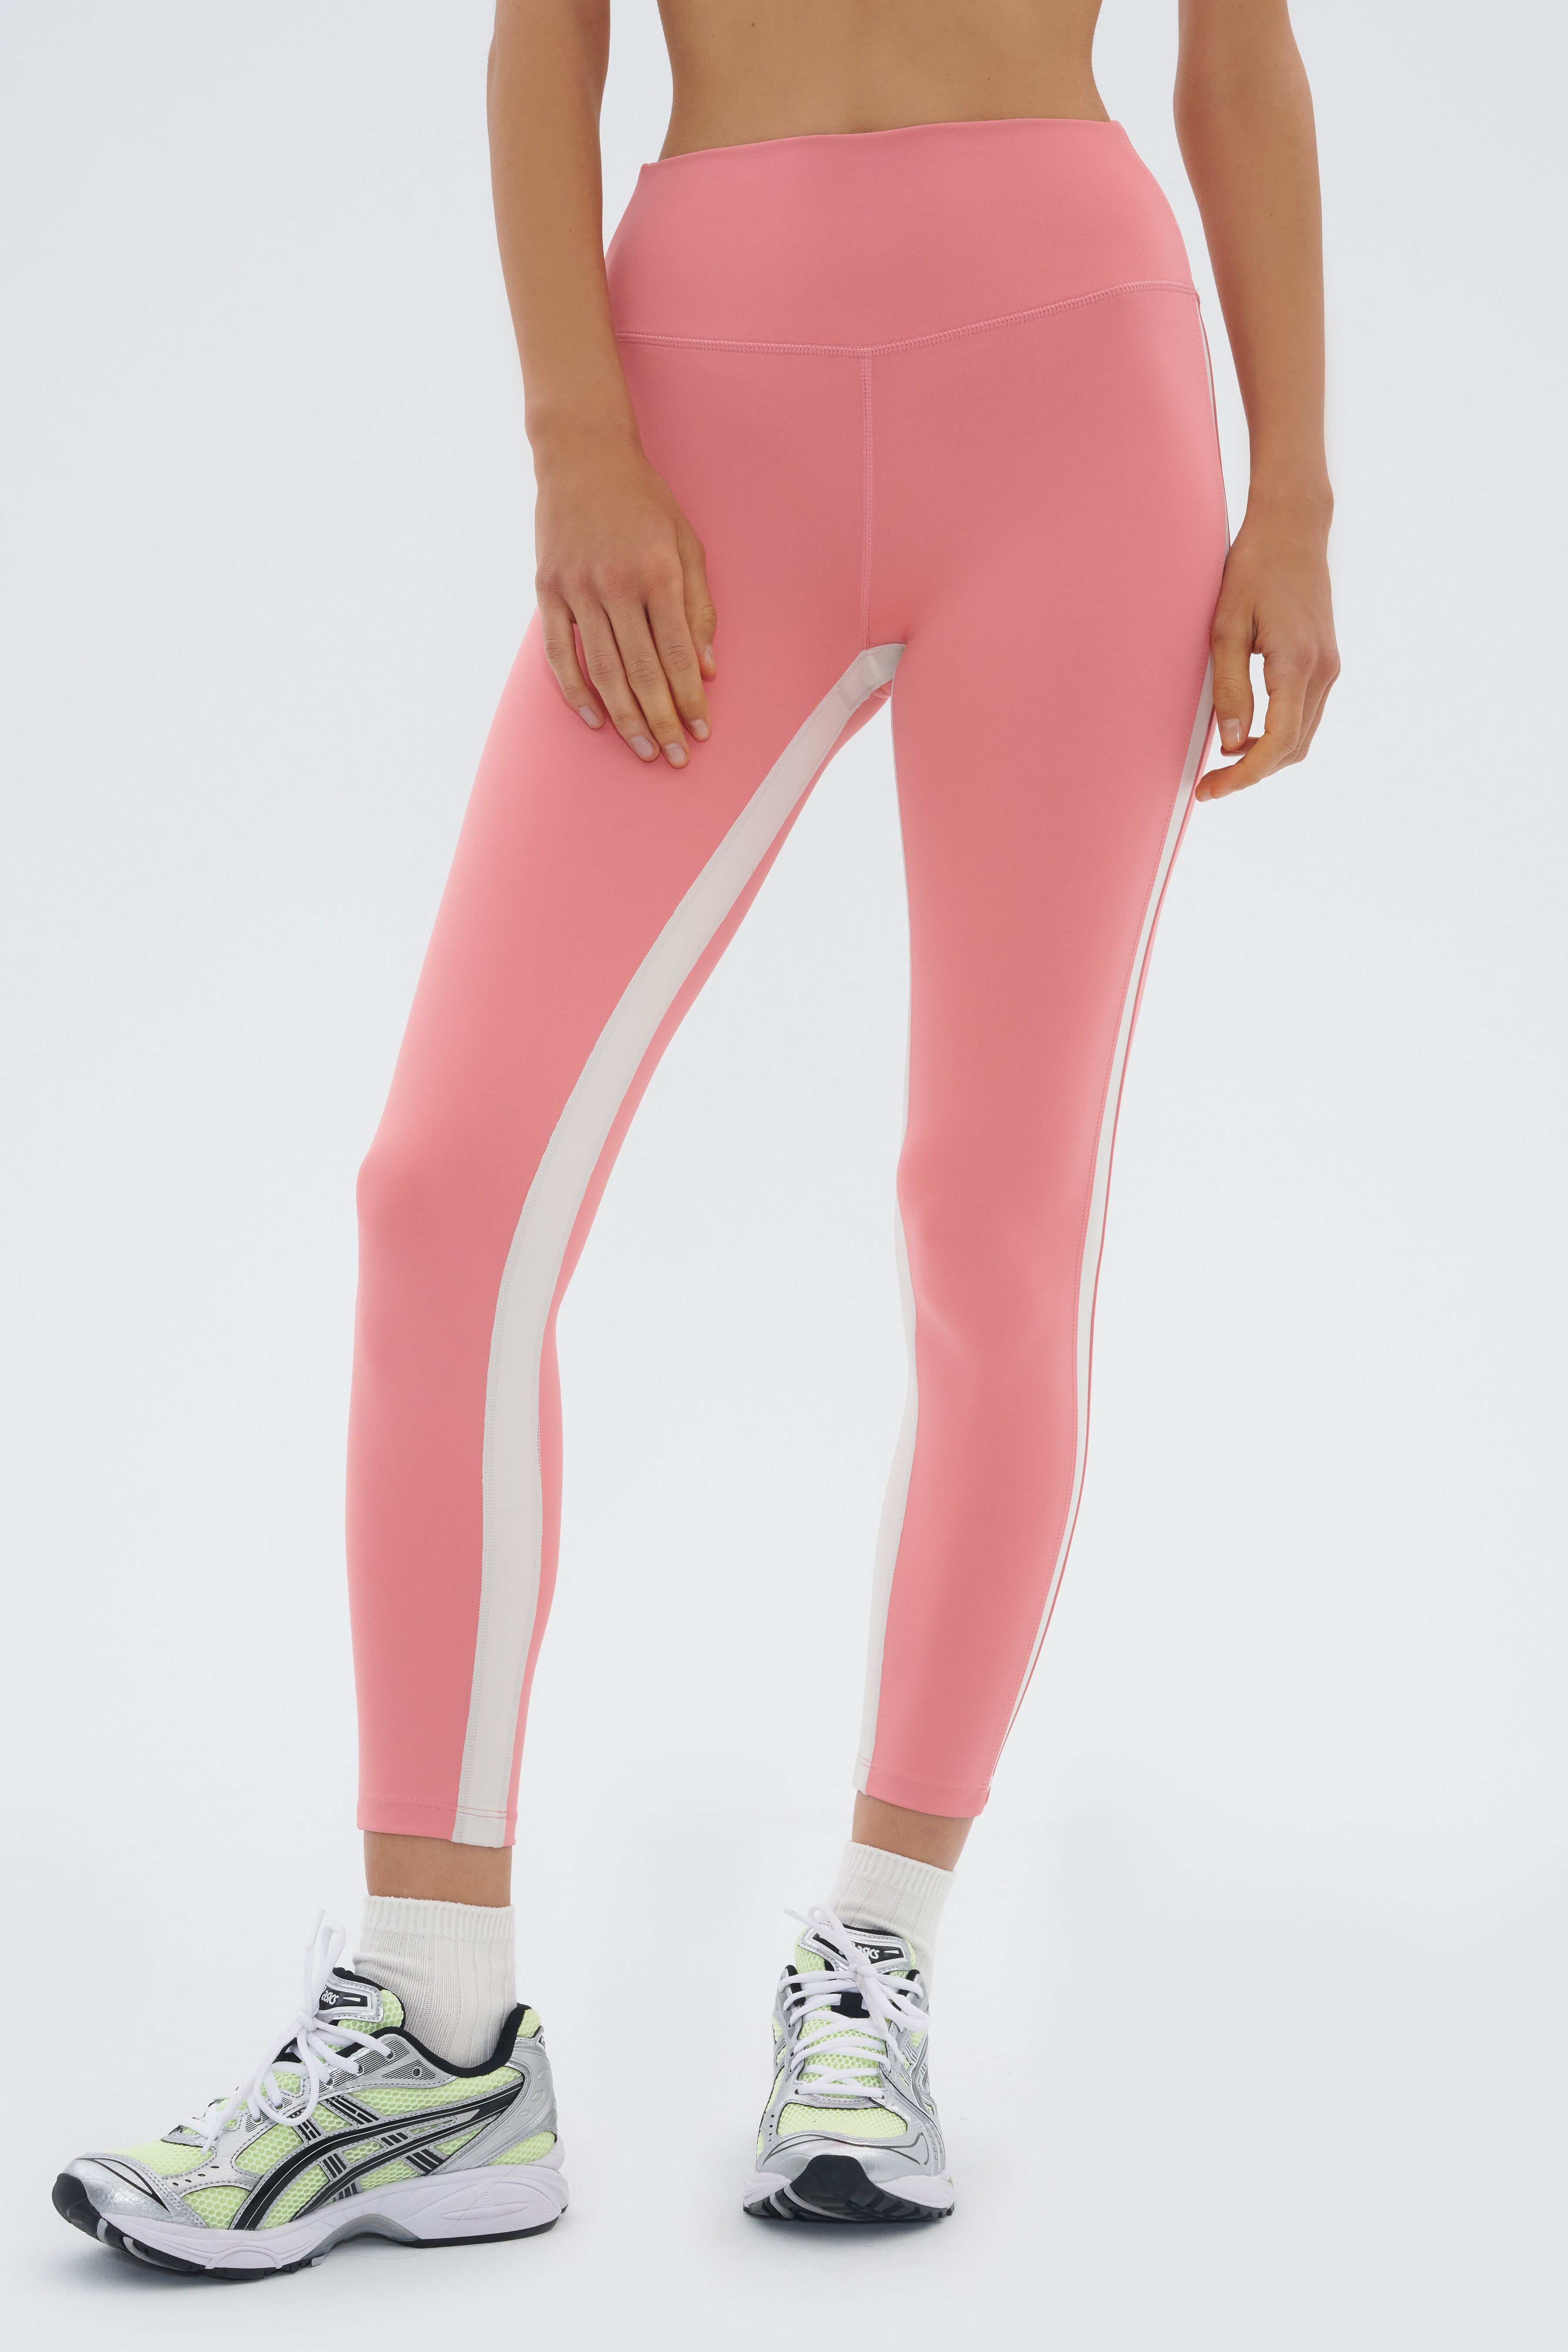 Splits59 Bianca High-Waisted Recycled Techflex Leggings | Anthropologie  Singapore Official Site